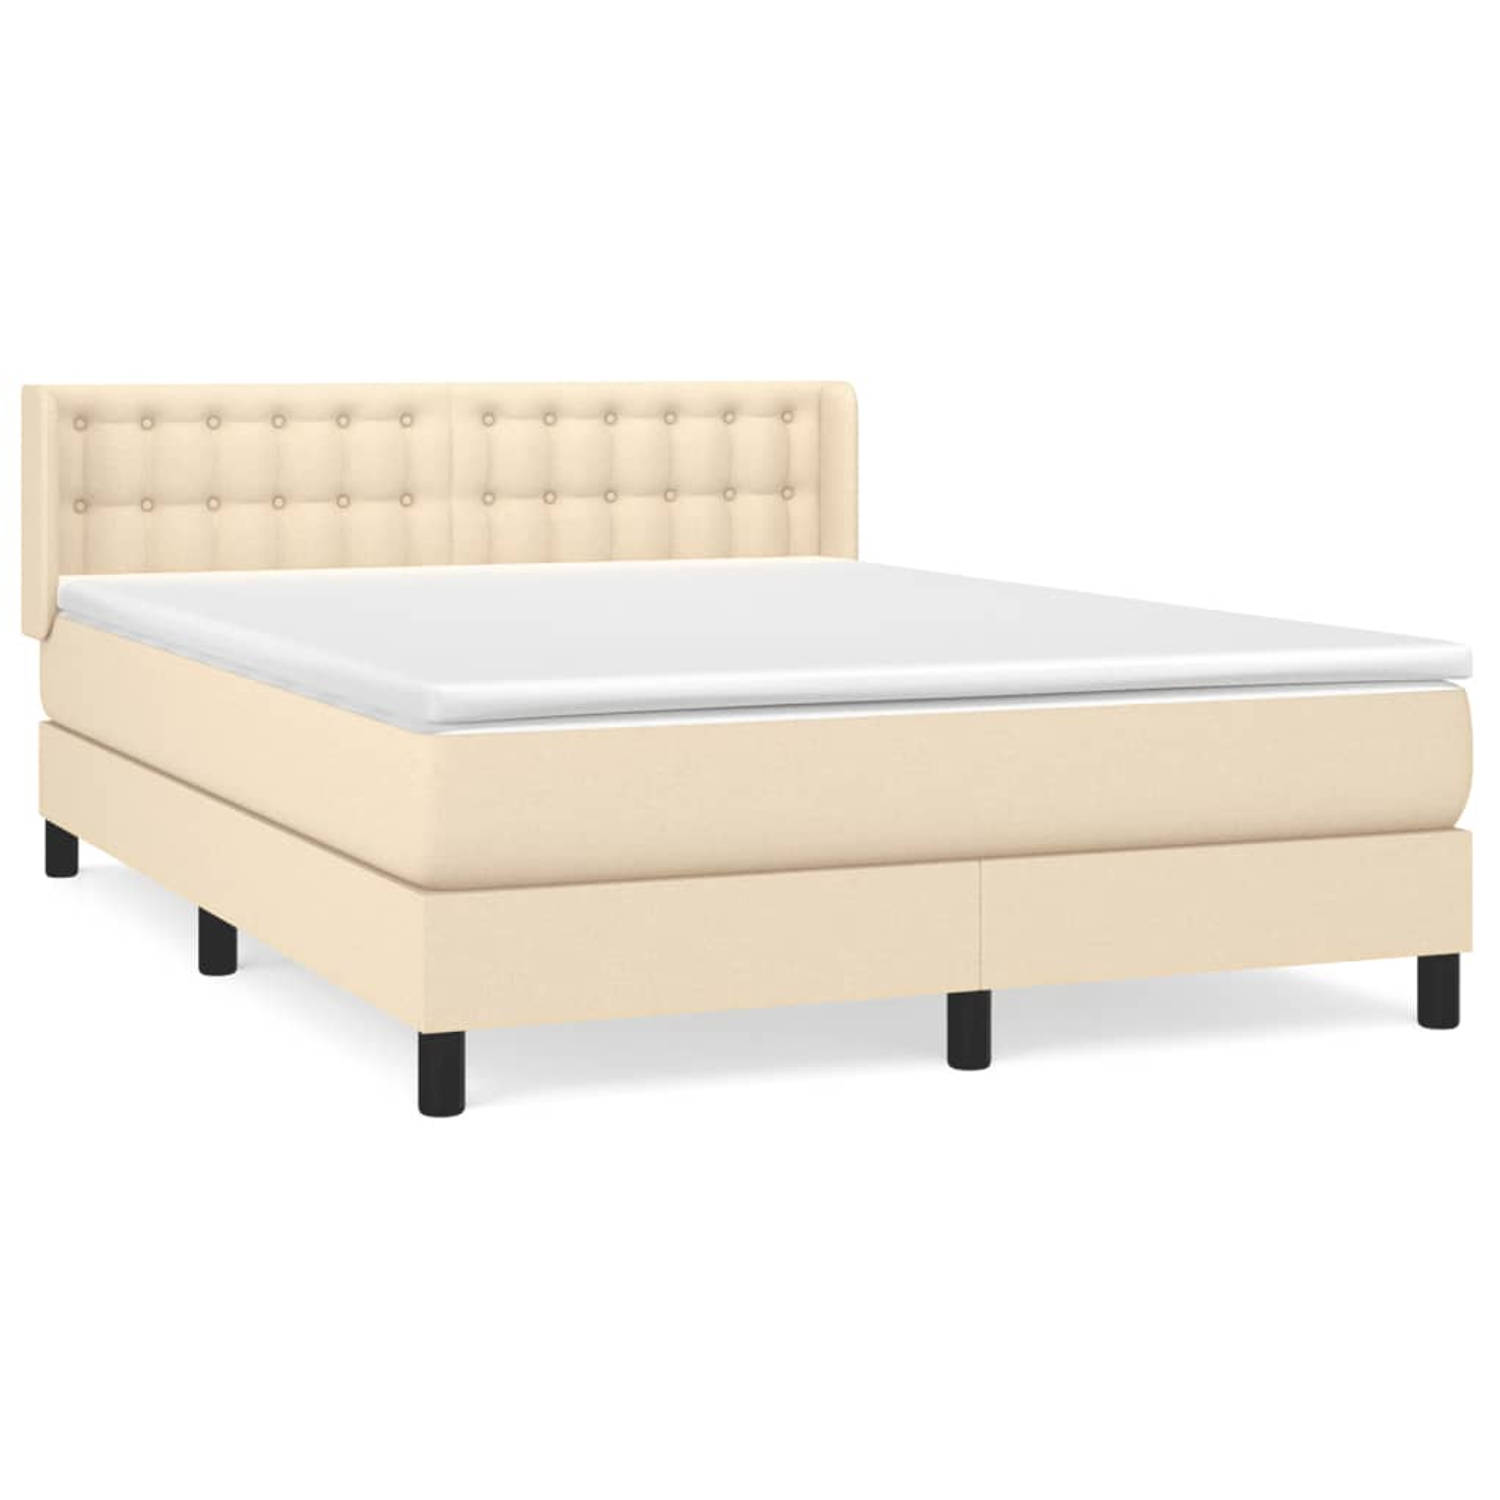 The Living Store Boxspringbed - s - Bed - 193x147x78/88cm - Crème